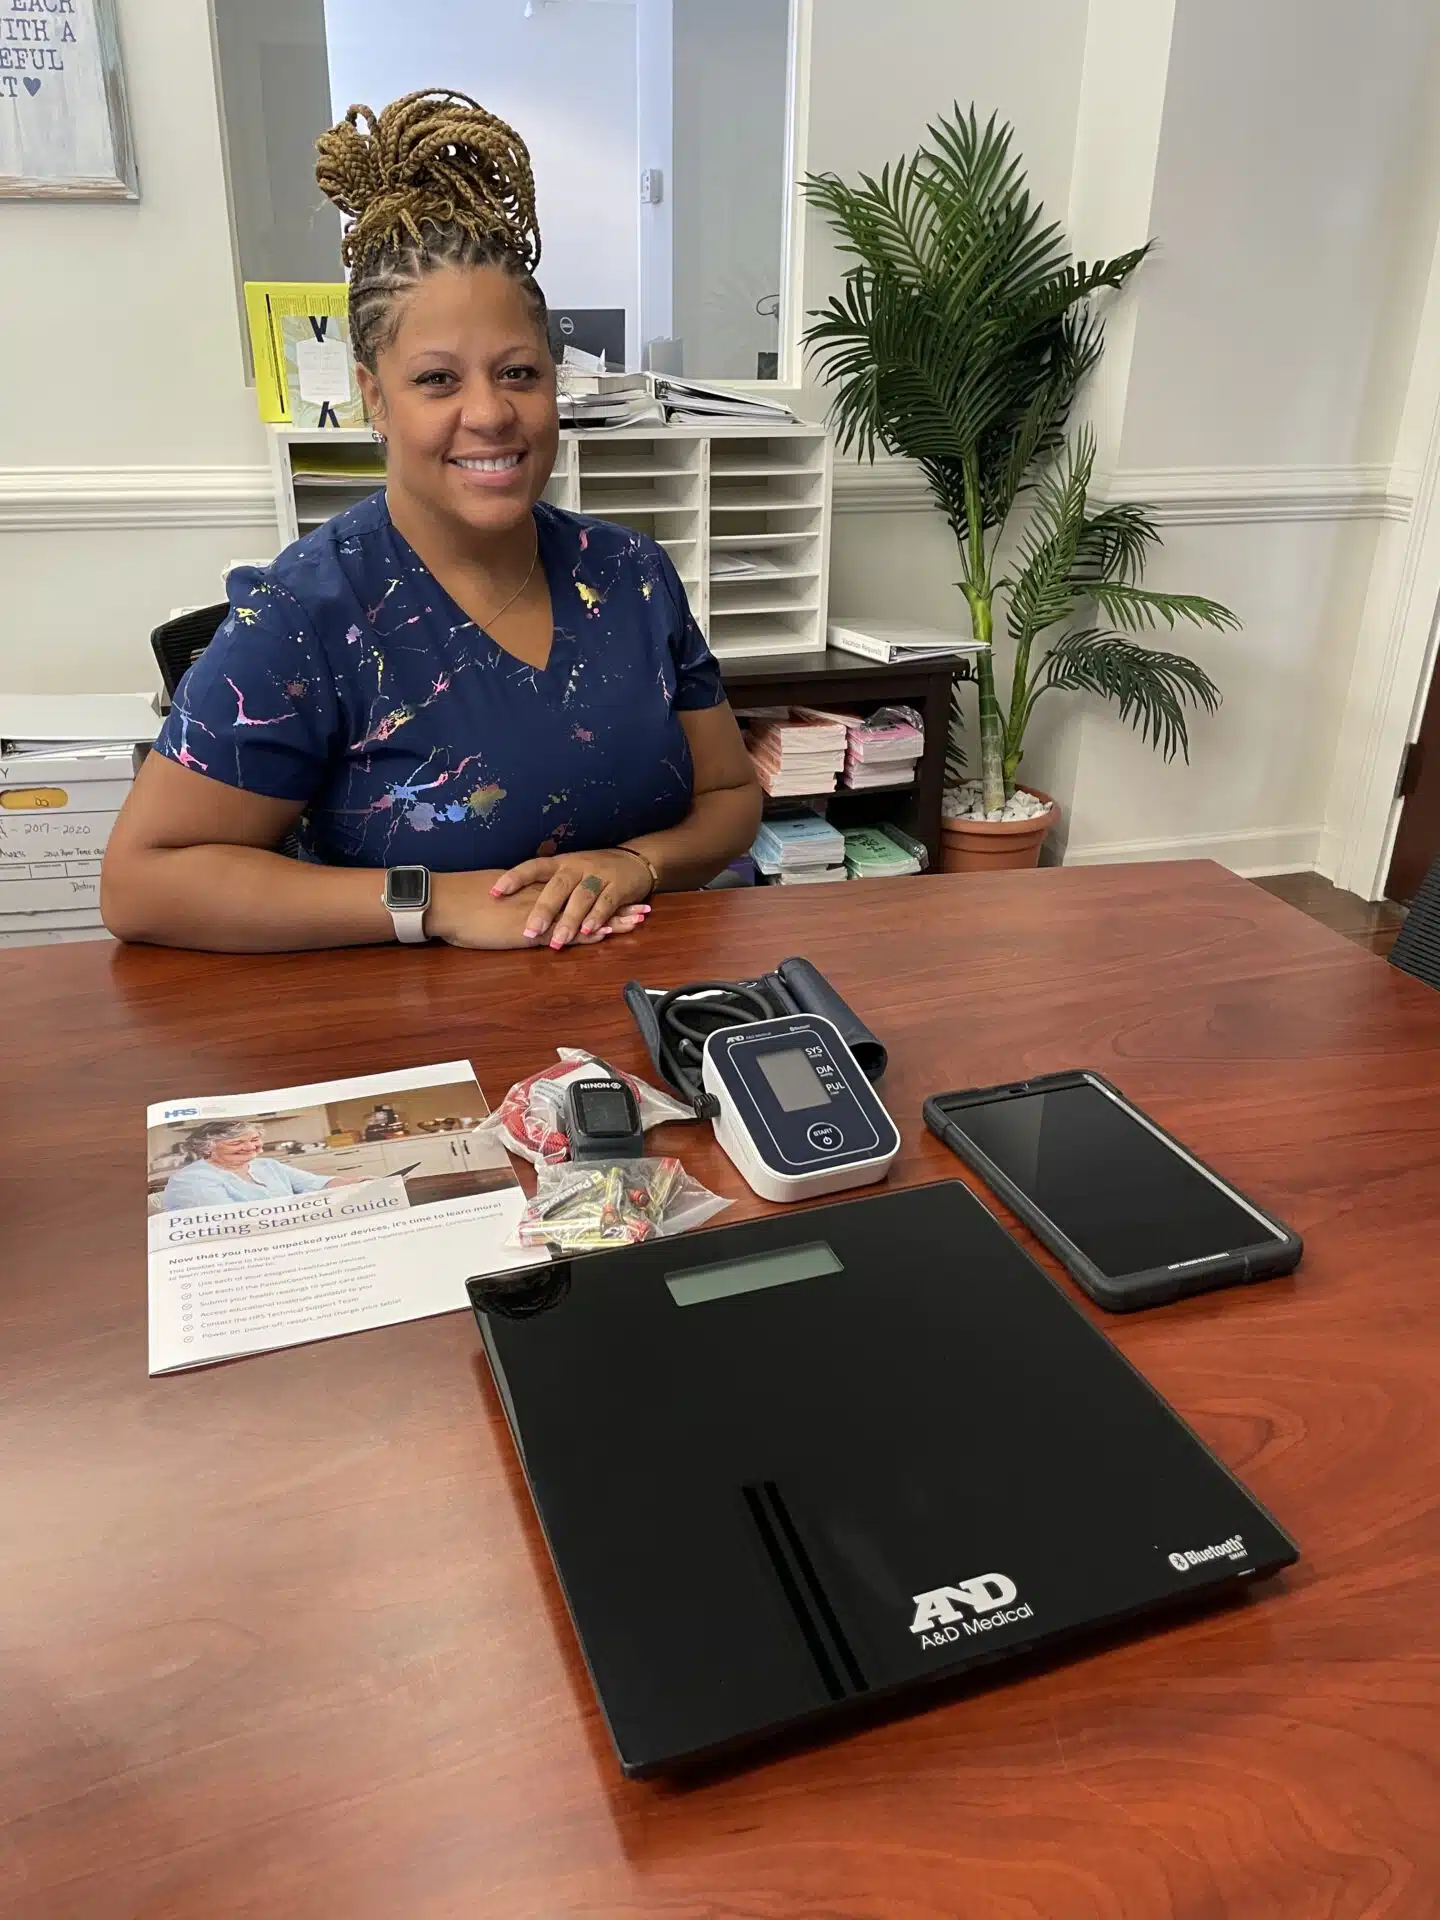 Tia Hunter has been a LPN with VHS Home Health Care for more than two years. She handles initial setup and monitoring of the mobile kits.